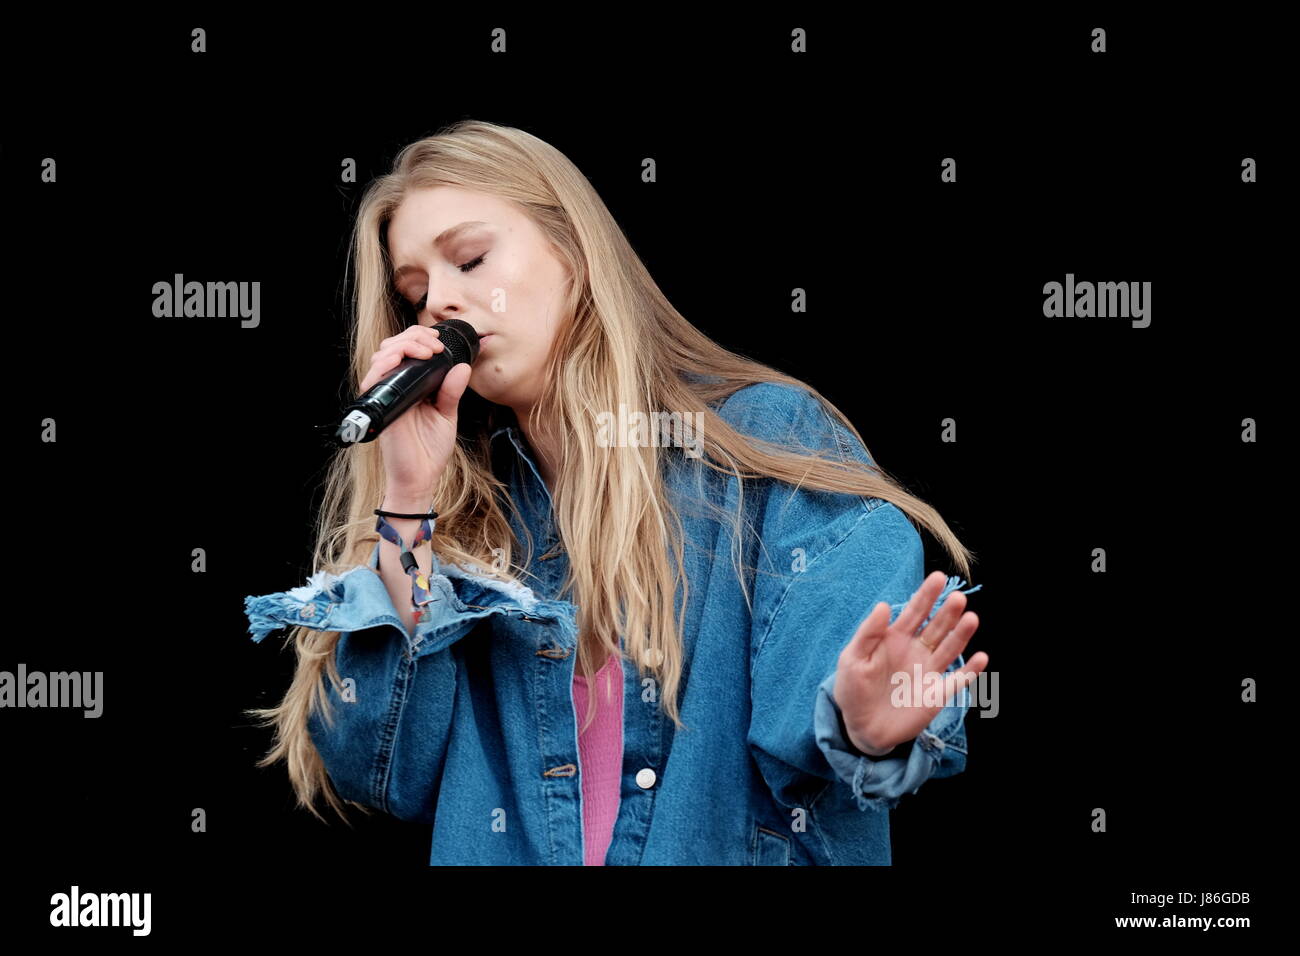 Hampshire, UK. 27th May, 2017. Common People Day 1 - British female singer  Rebecca Claire "Becky" Hill performing at Common People Southampton, 27th  May 2017, Hampshire, UK Credit: DFP Photographic/Alamy Live News